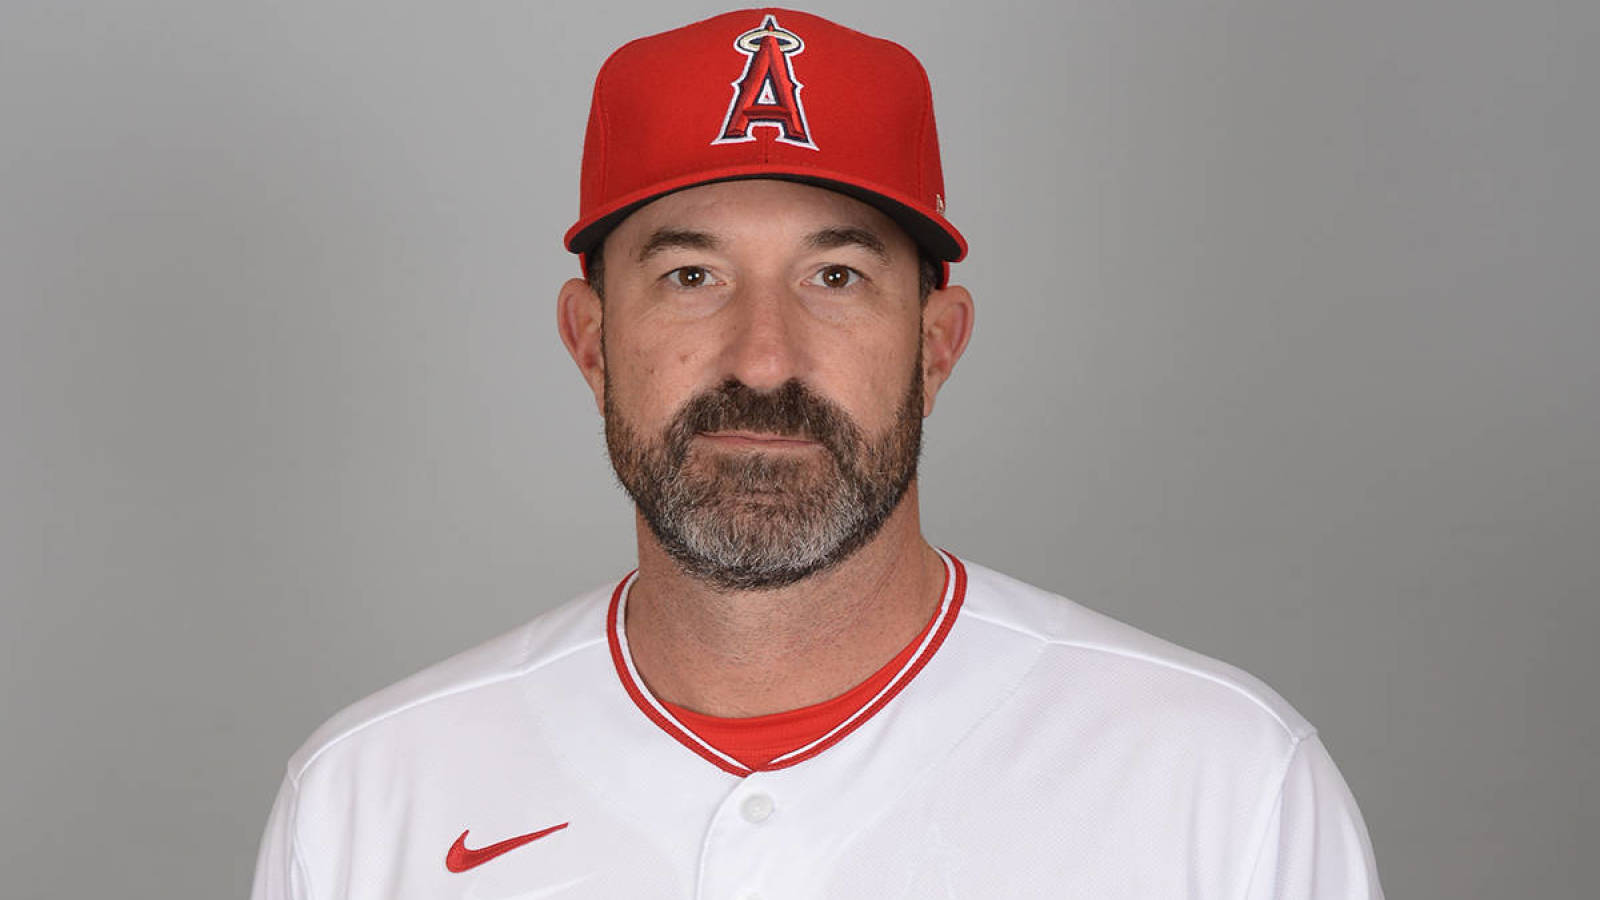 Angels pitching coach Mickey Callaway suspended amid allegations of lewd behavior